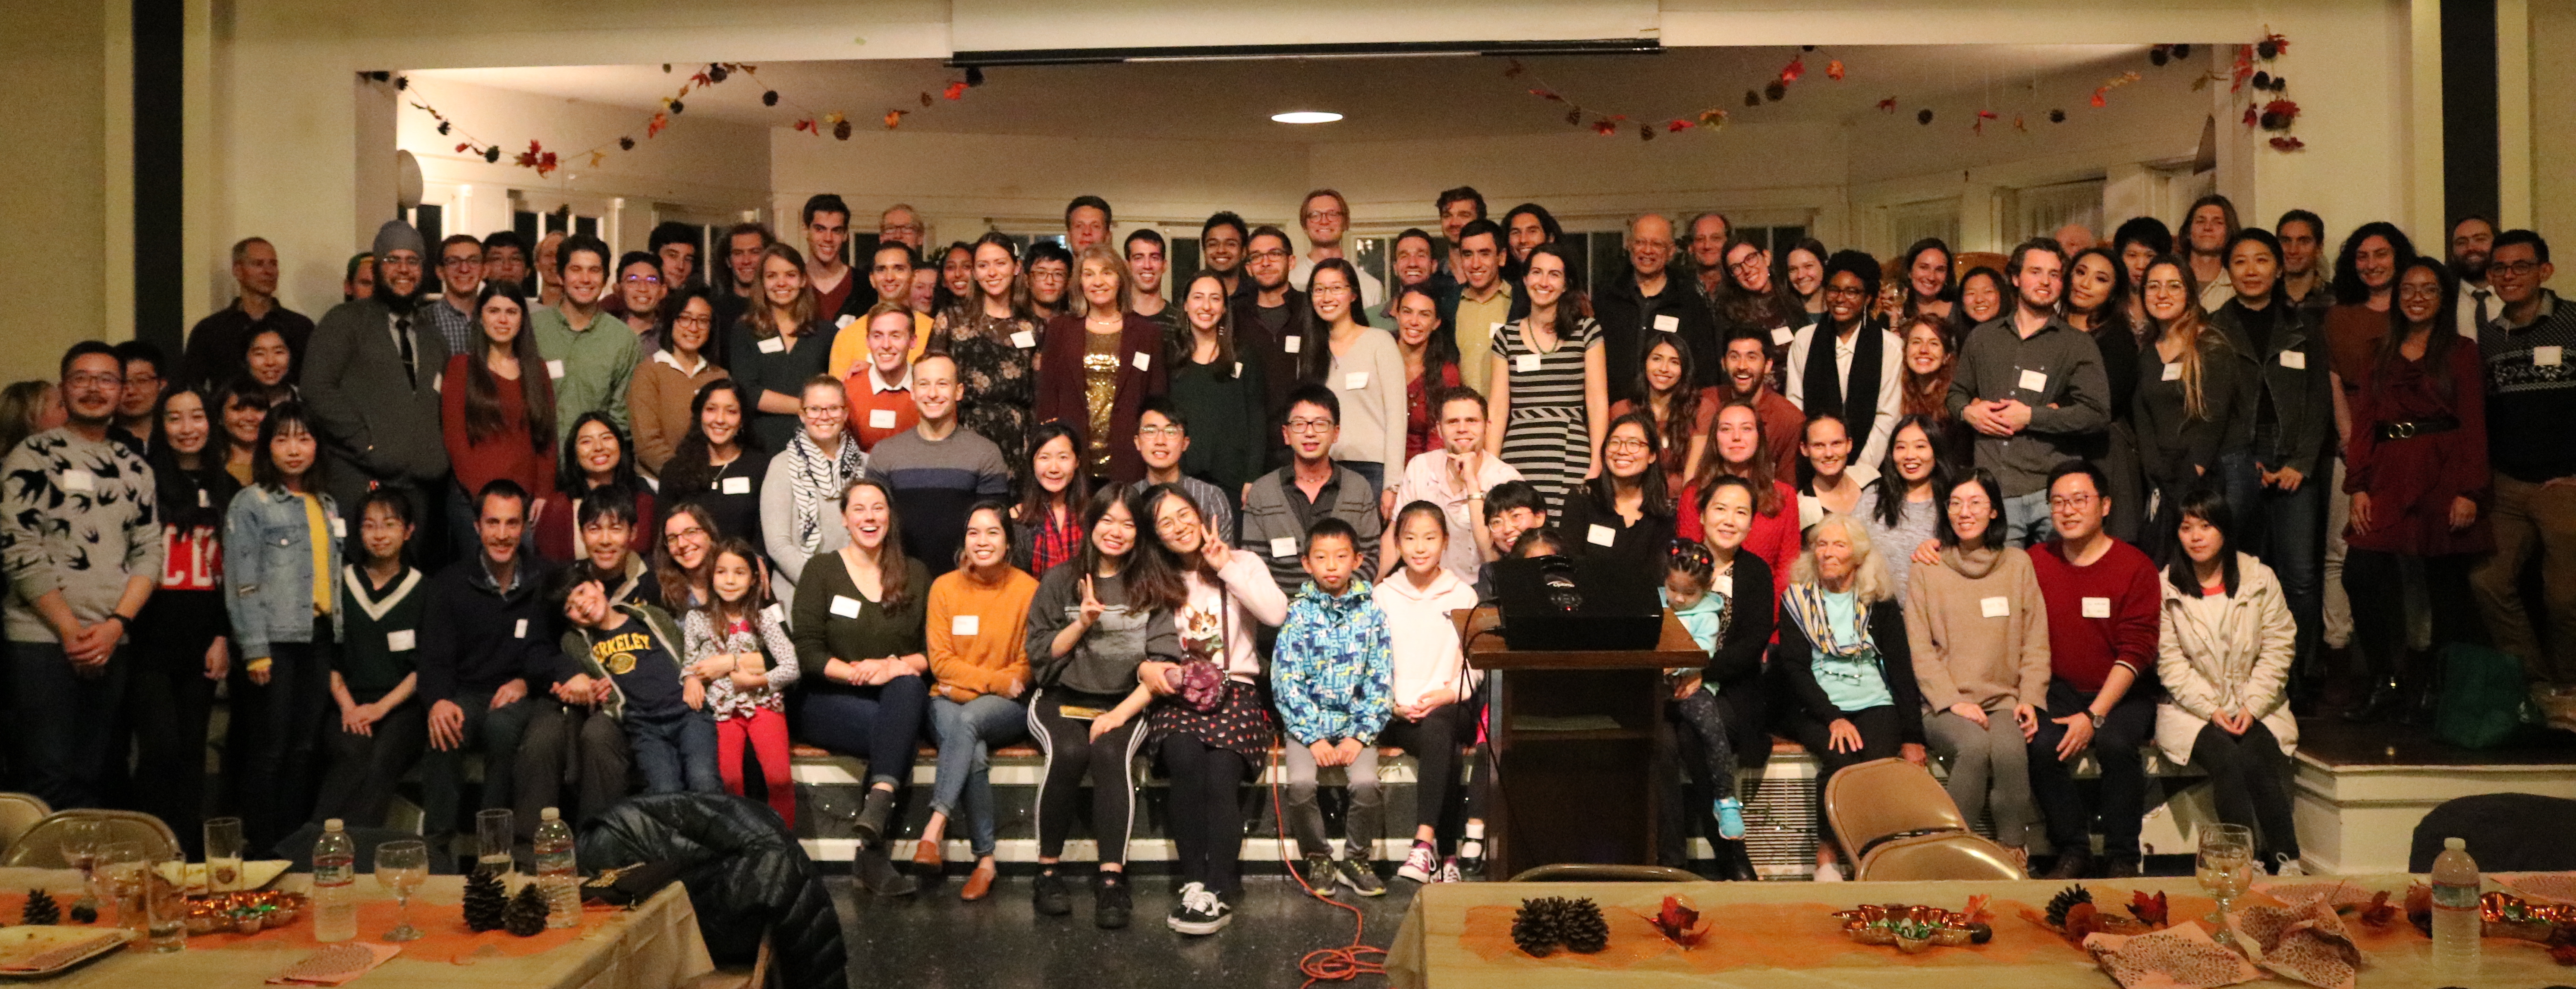 CEE's Environmental Engineering group celebrates Thanksgiving in 2019